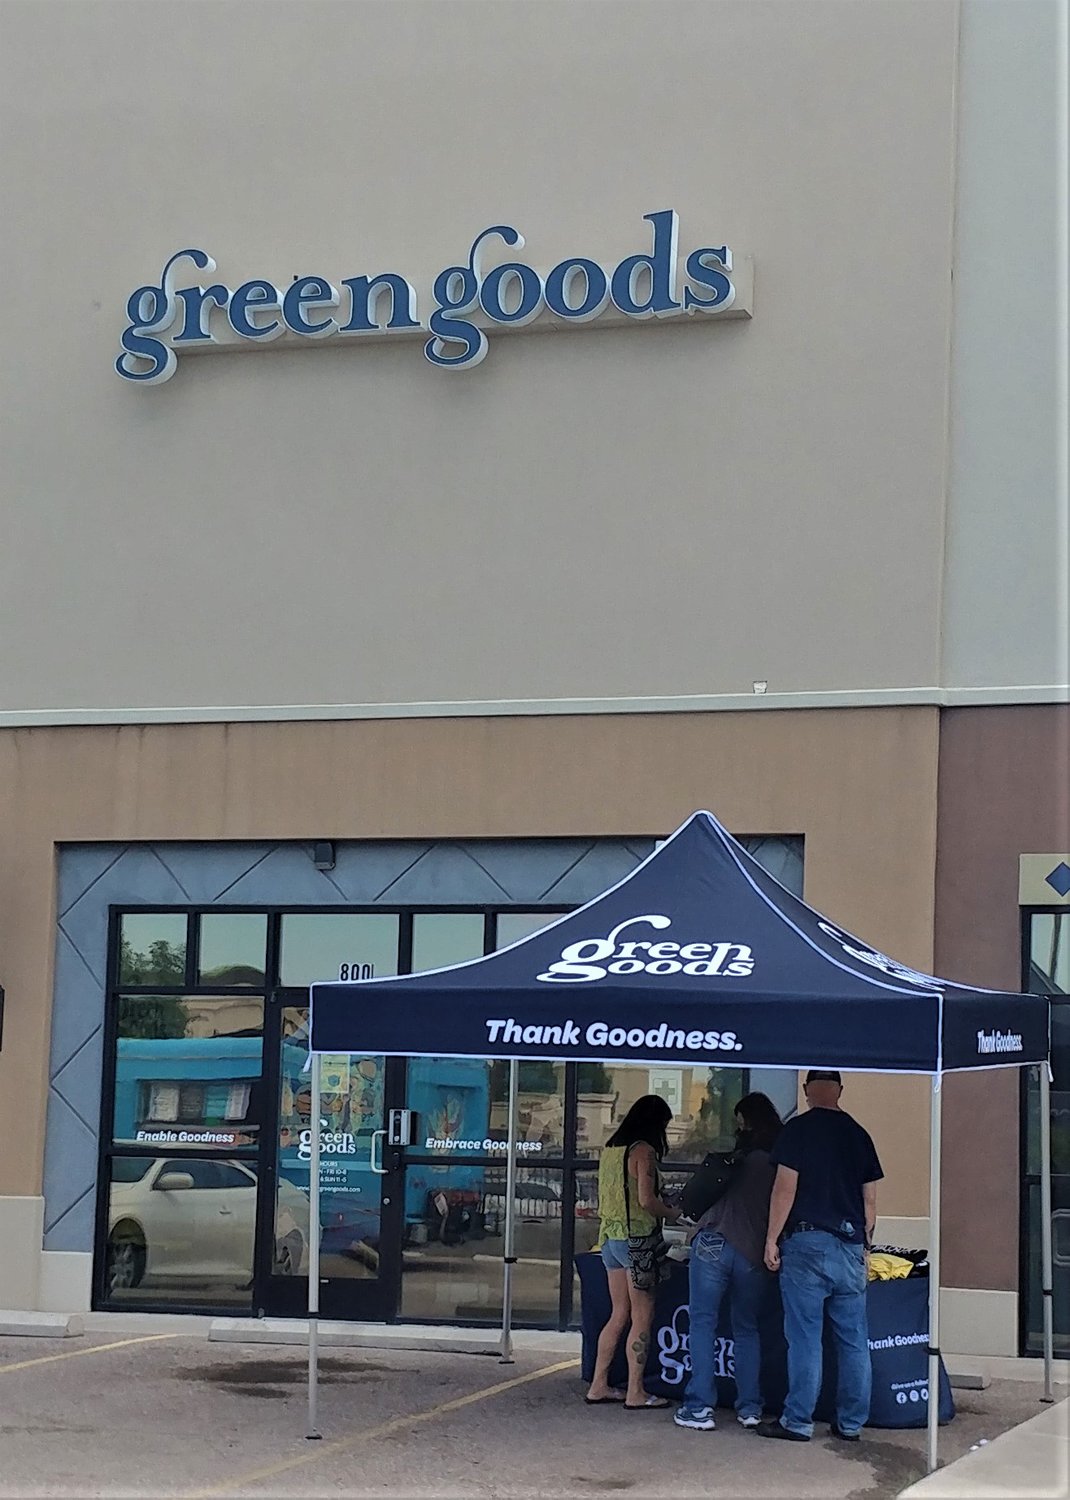 Green Goods cannabis dispensary had its grand opening Aug. 18 at 1405 S. Valley.